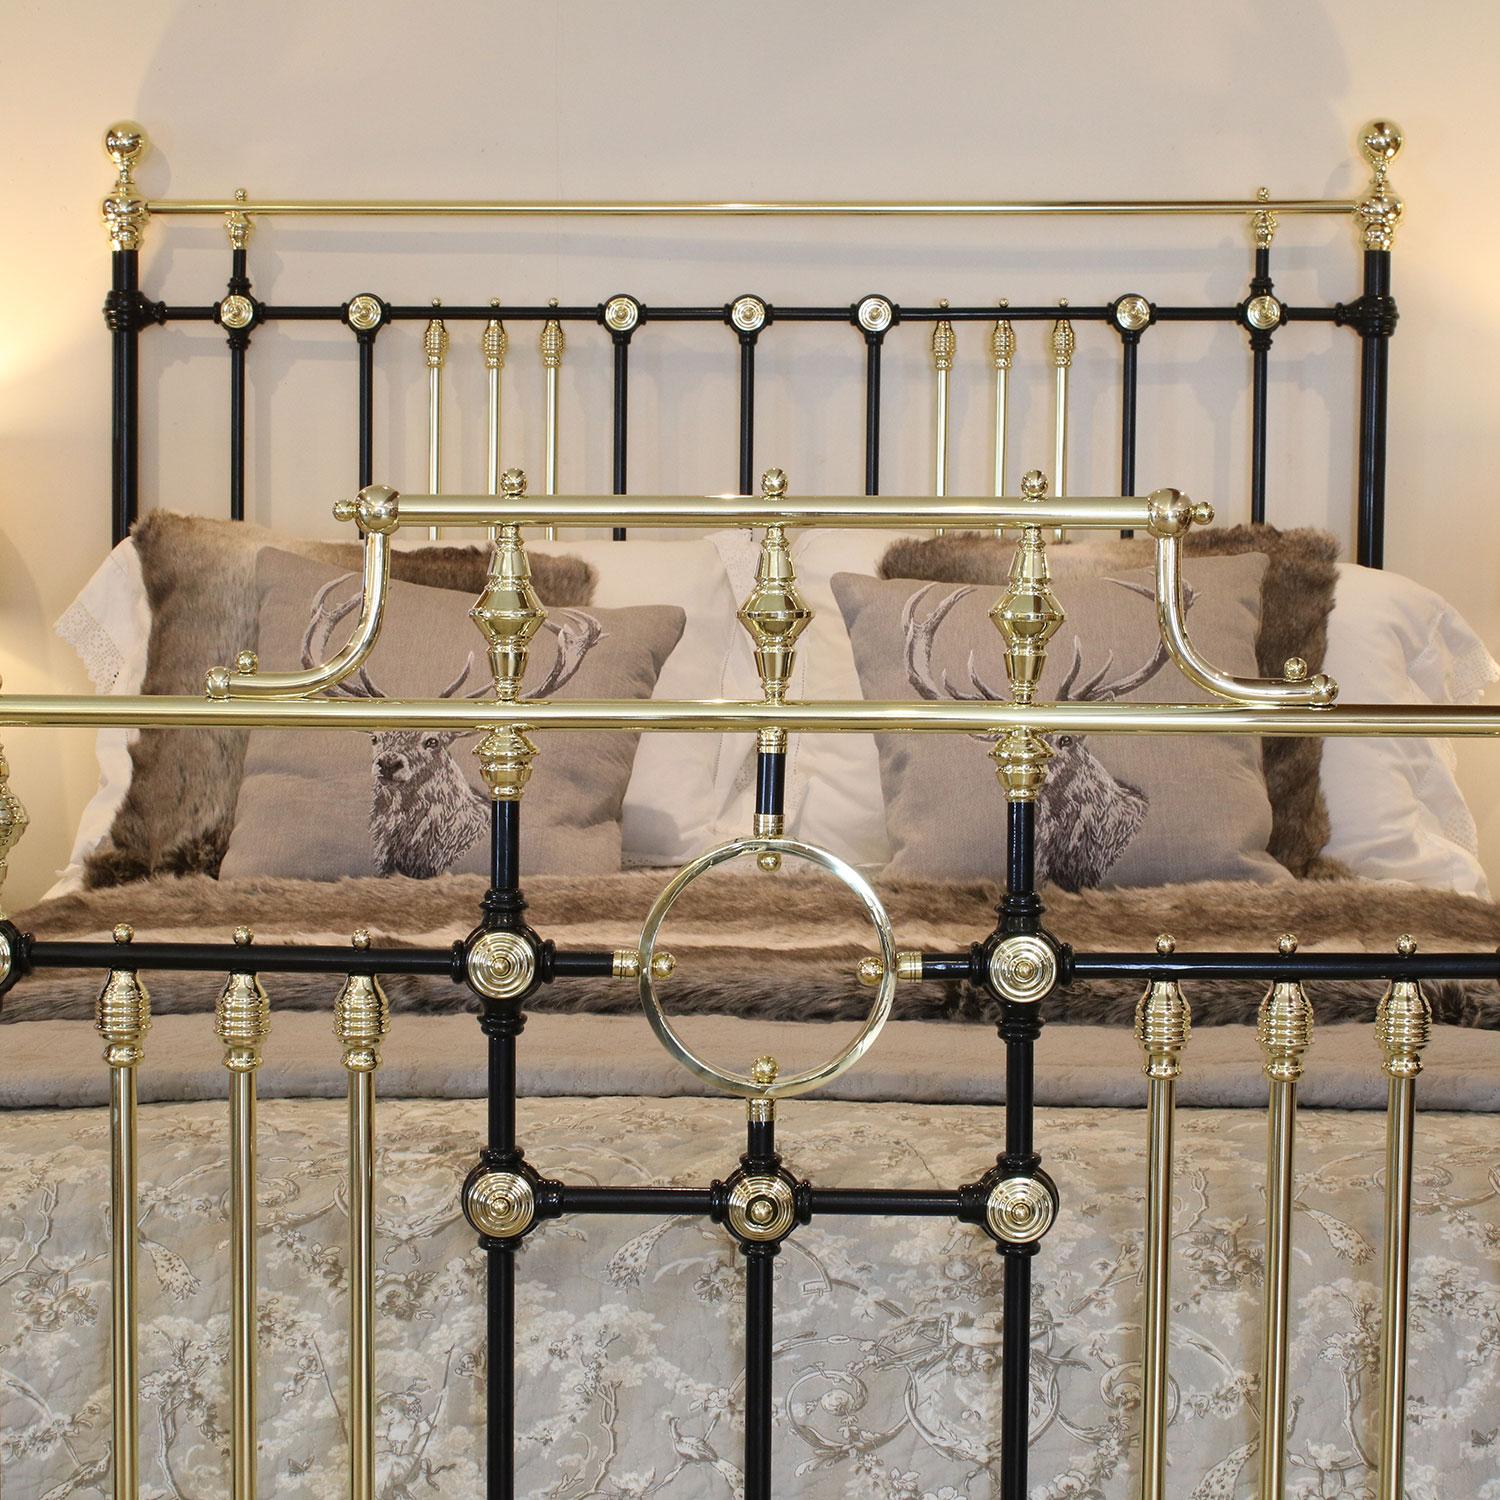 A superb brass and iron bedstead adapted from an original Victorian frame, finished in black with decorative brass rosettes, brass ring and raised gallery.

This bed accepts a British king-size or US queen-size (measure: 5ft, 60 in or 150cm wide)